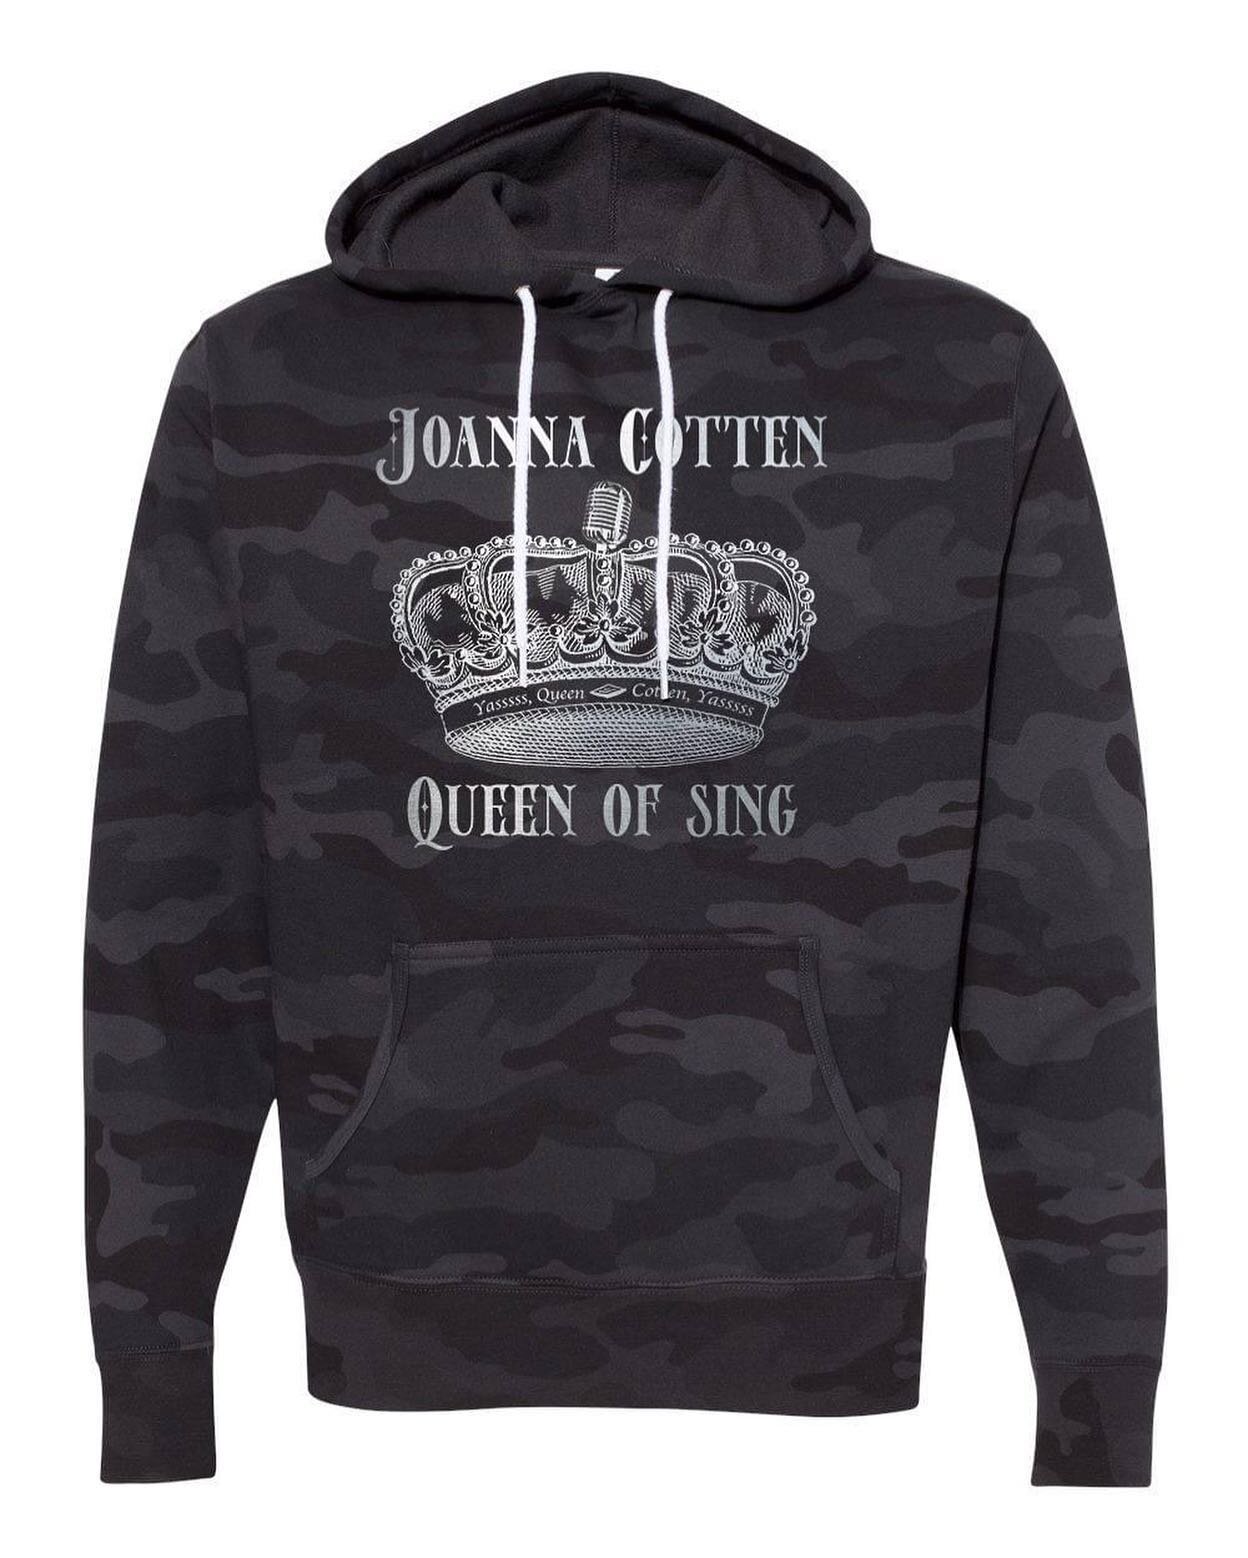 It&rsquo;s cold, y&rsquo;all! Get warm with a camo hoodie! Looking forward to seeing everyone in Kentucky tonight!🤘
#ericchurch #joannacotten #artist #music #tour #queenofsing